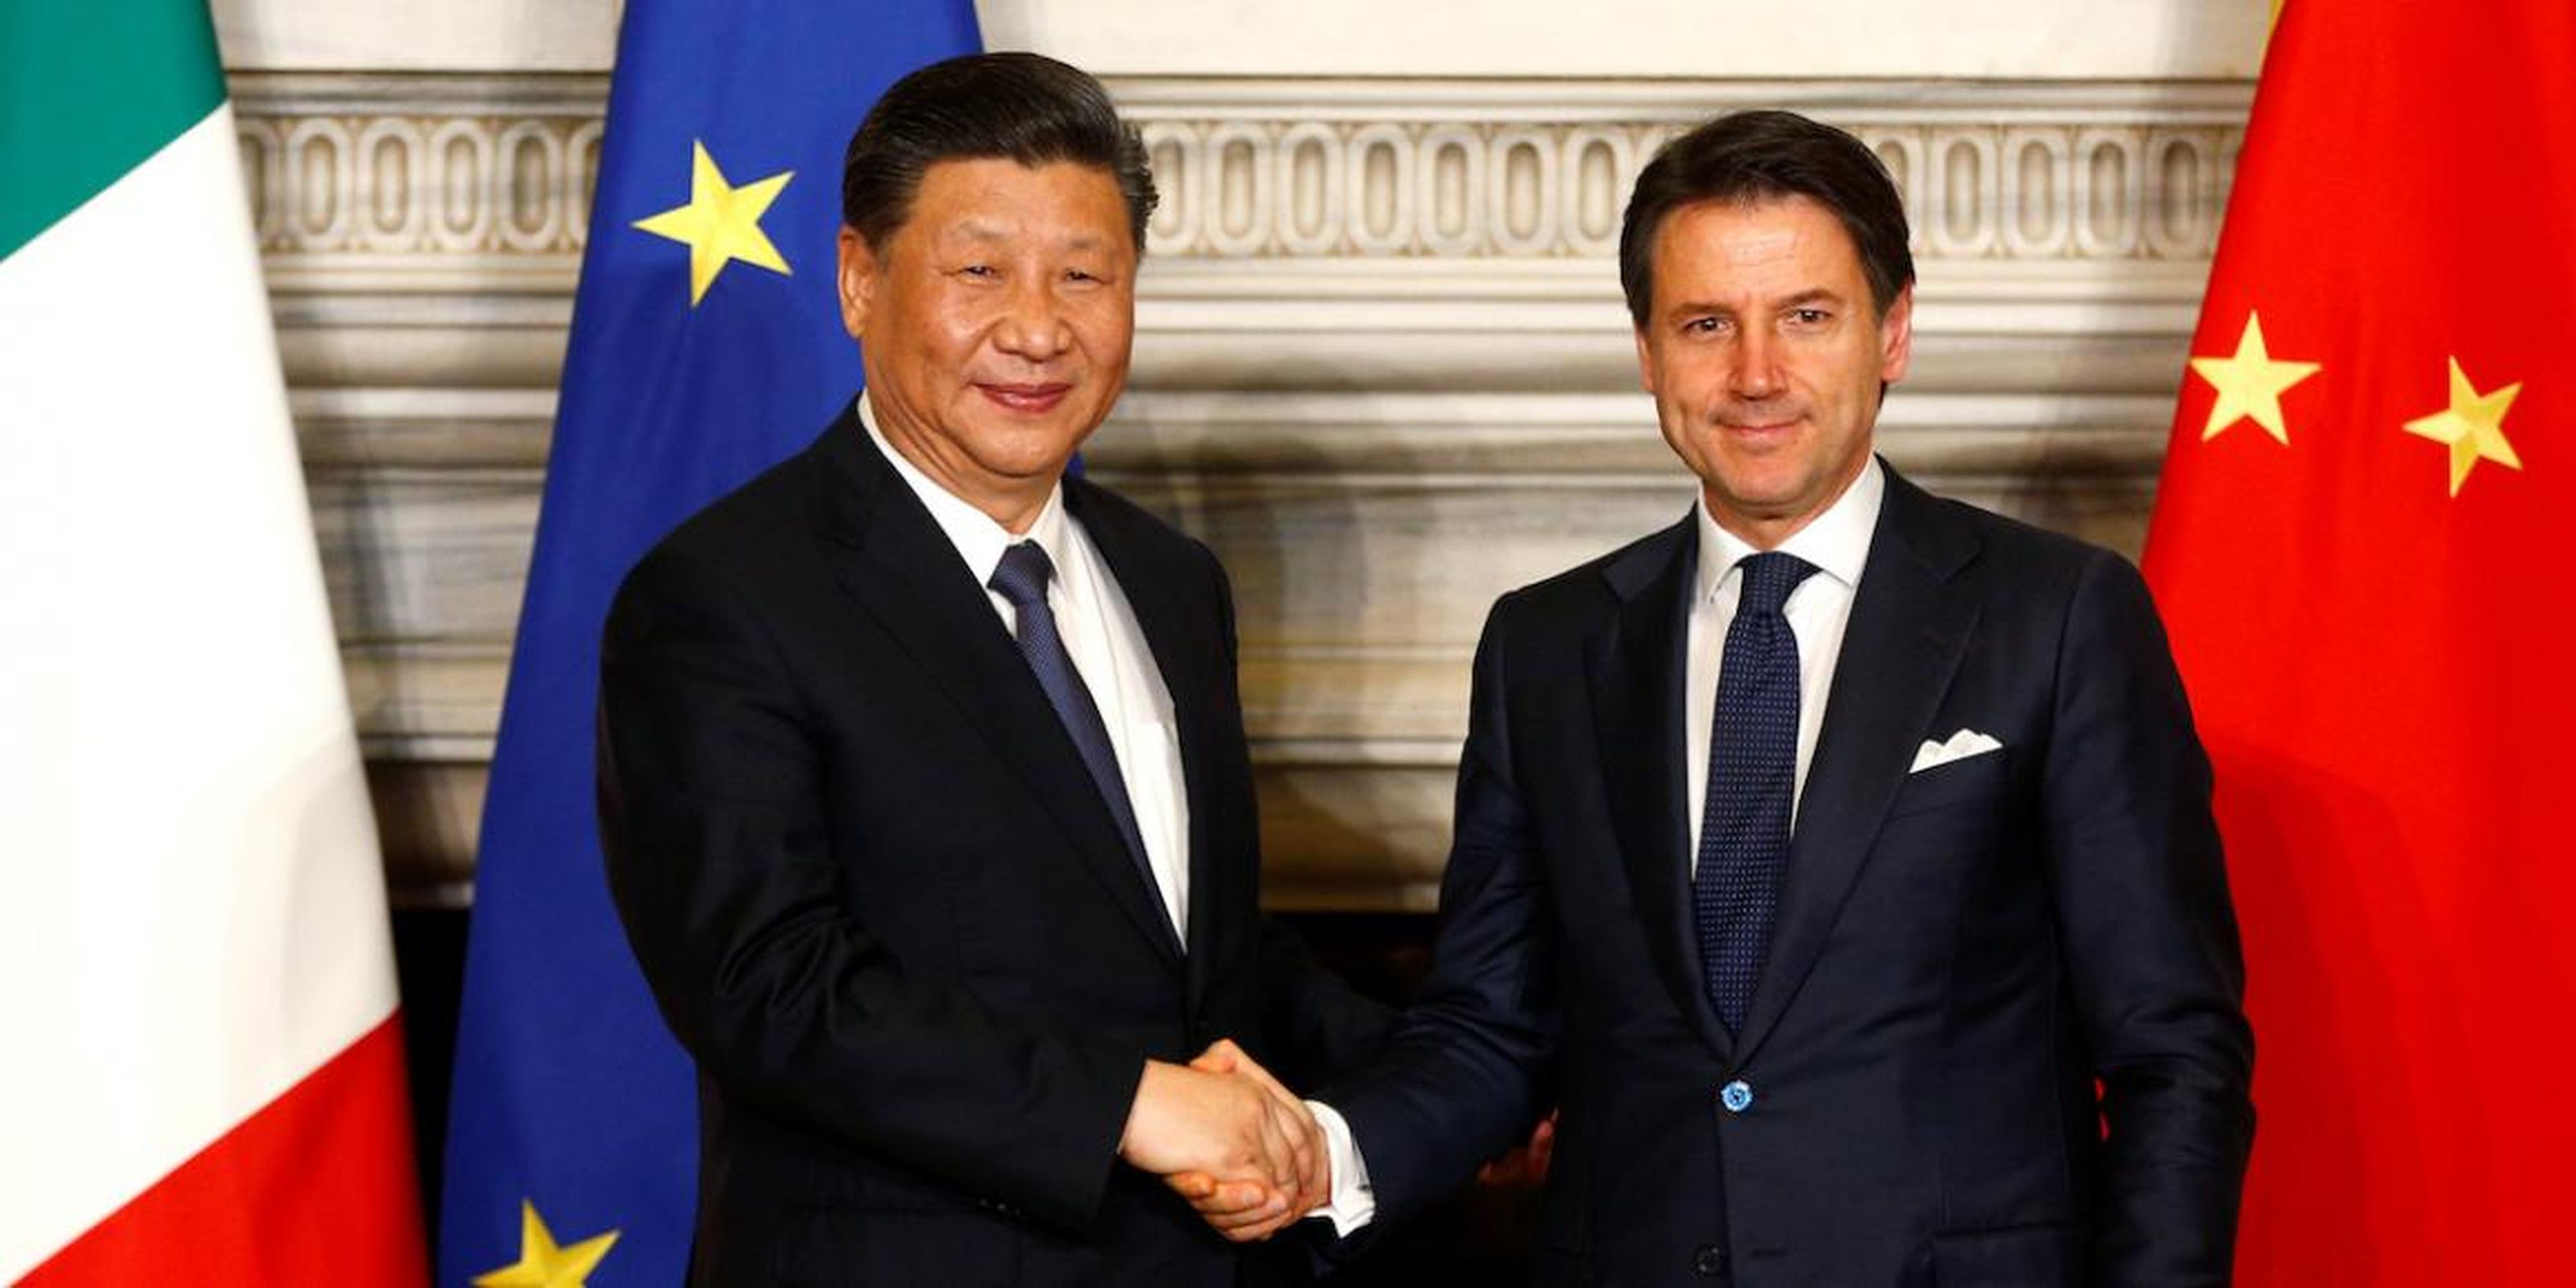 Xi with Italian Prime Minister Giuseppe after signing trade agreements at Villa Madama in Rome on March 23, 2019.